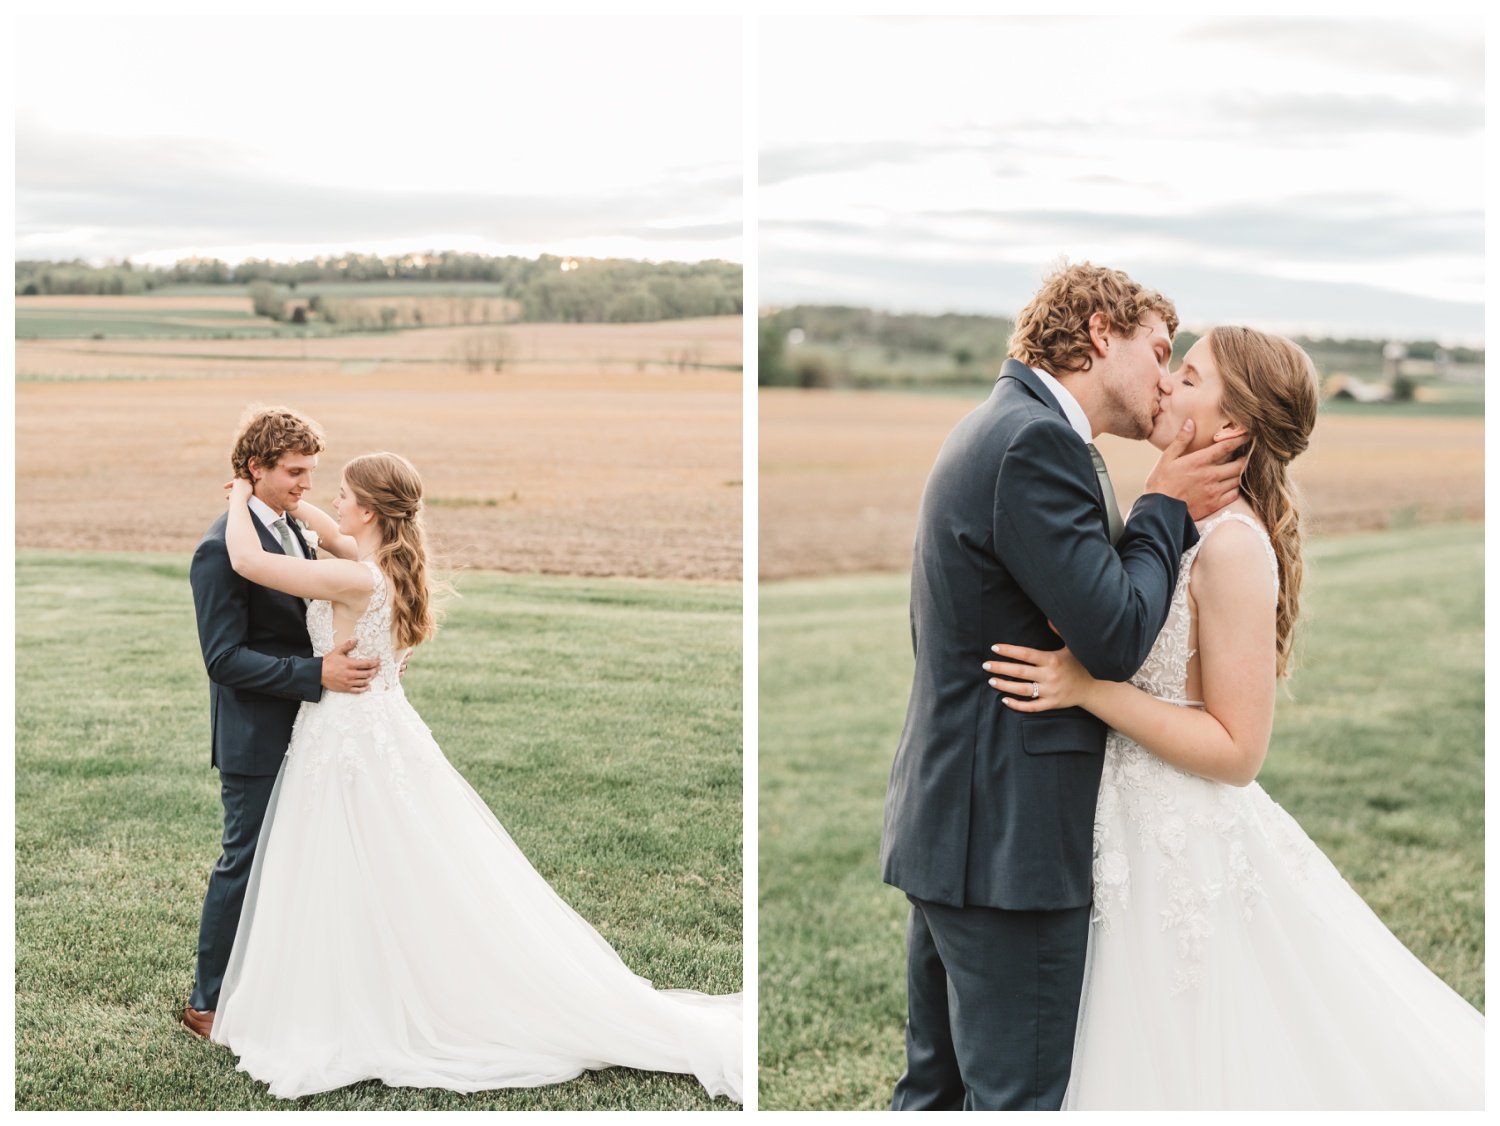 Harvest View Barn at Hershey Farms Wedding, sunset pictures, bride &amp; groom